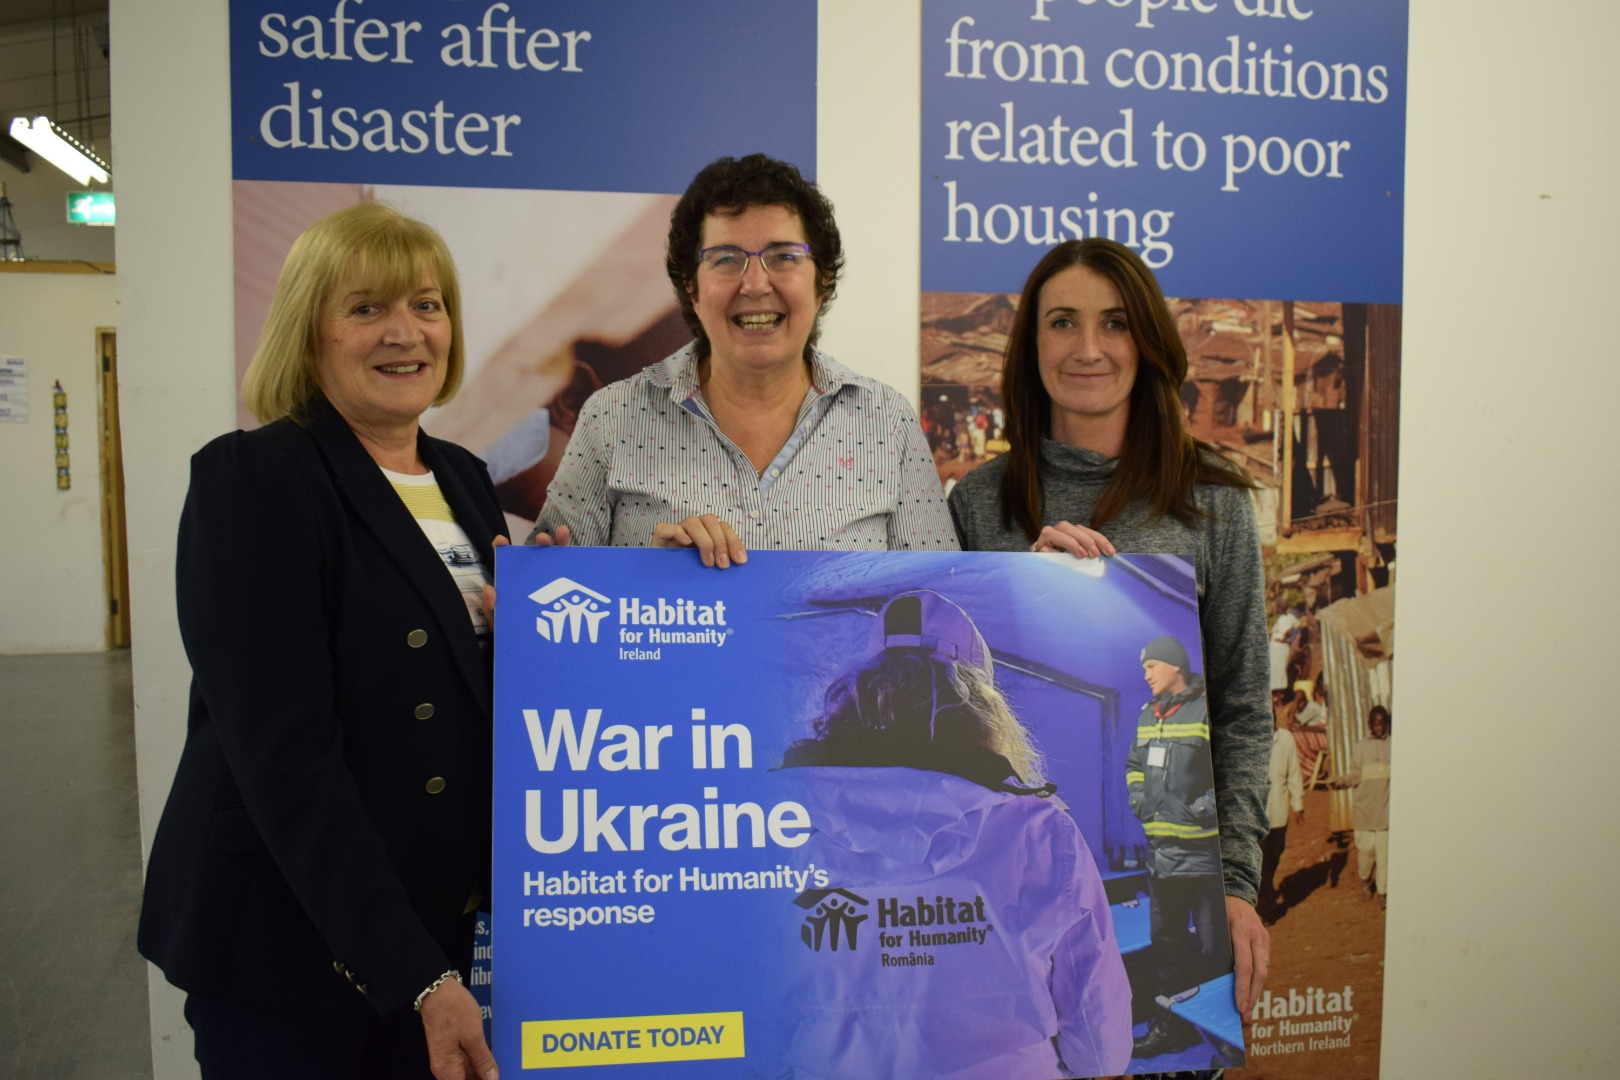 Jenny Williams, Habitat Chief Executive (center) with members of Downshire Tennis Club. They all all holding a sign which says "War in Ukraine" with a photo of Habitat's Ukraine Response